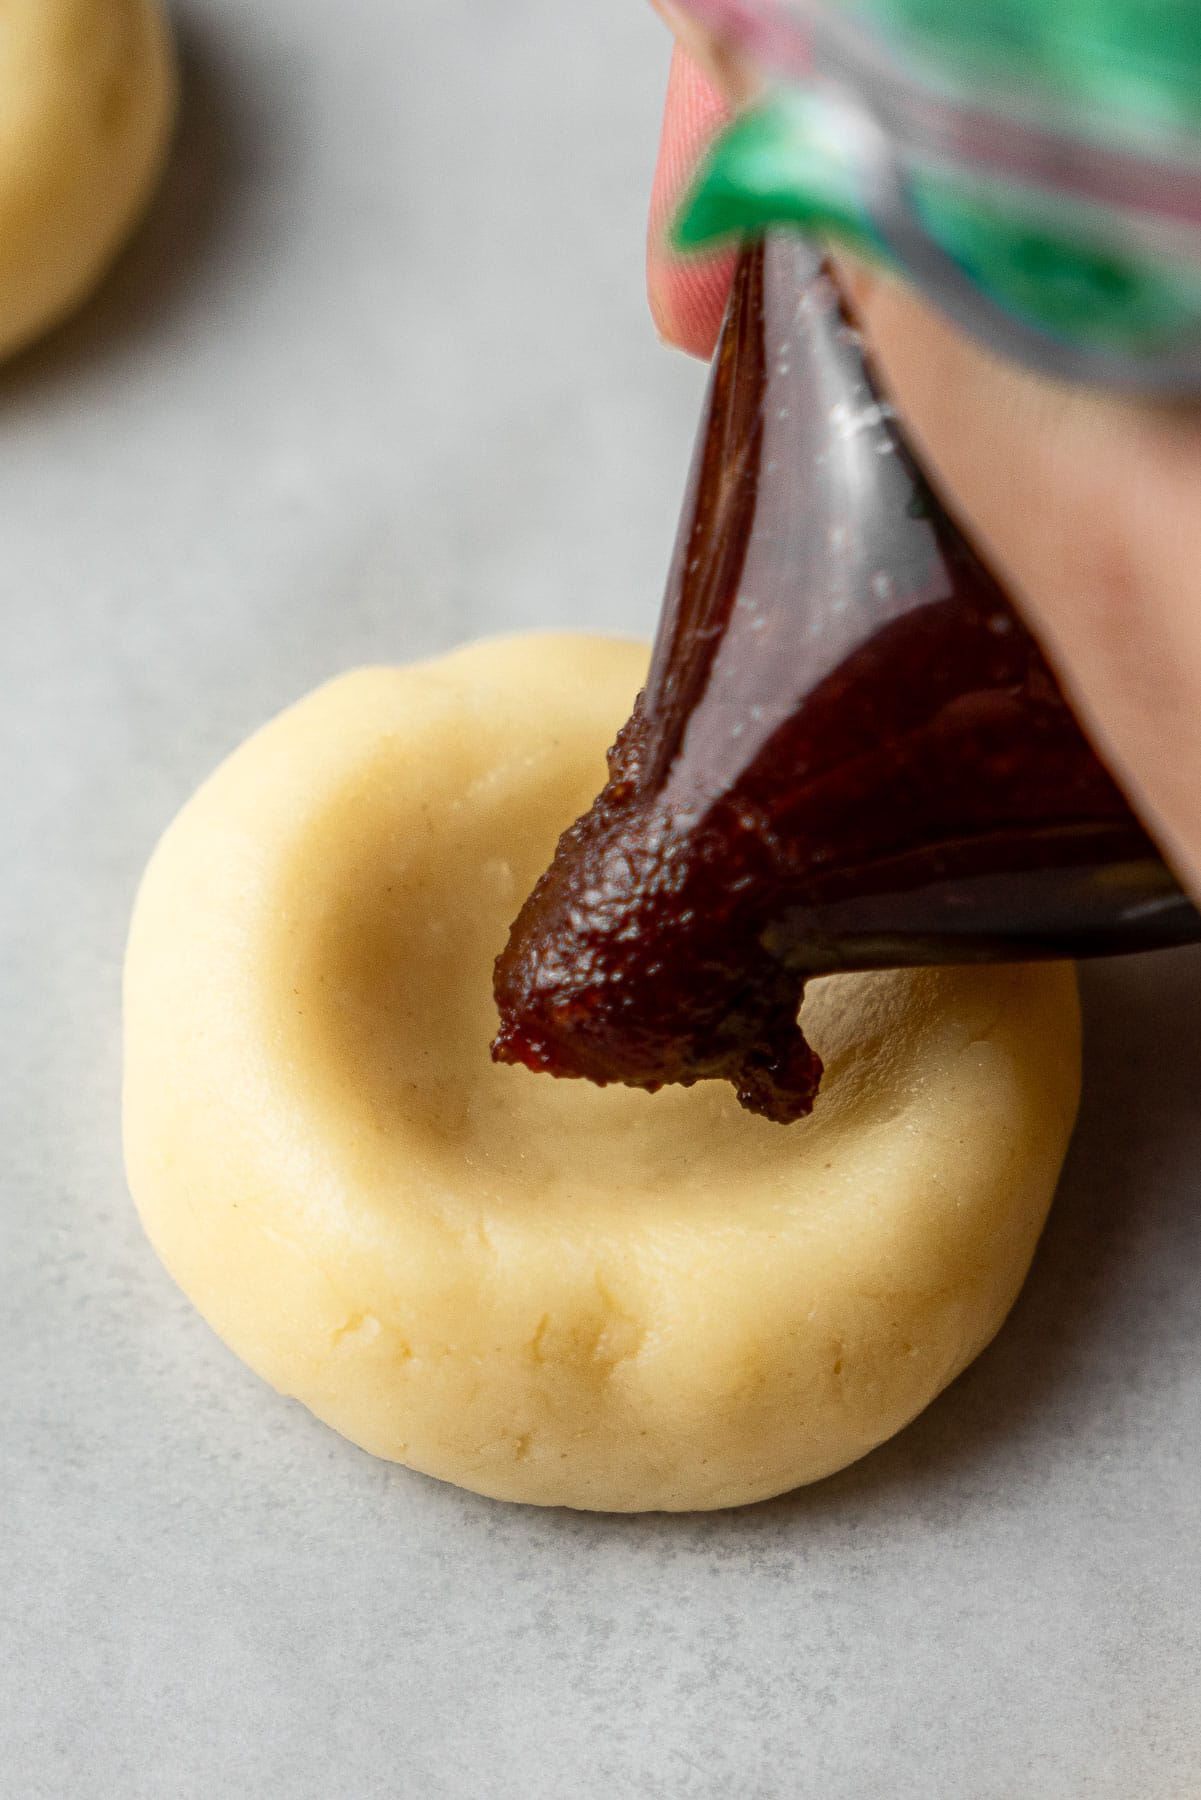 Piping guava paste into a cream cheese cookie with a thumbprint.